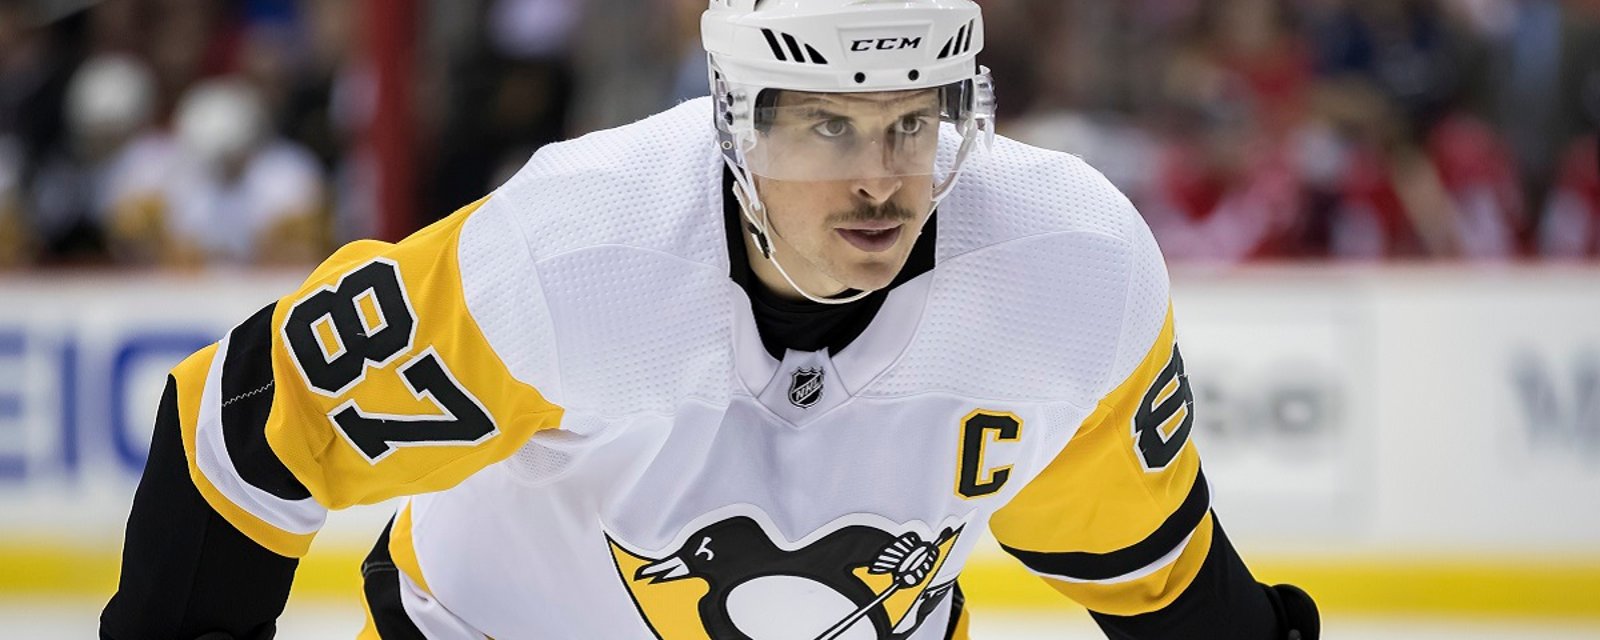 Penguins make two line up changes and provide an update on Crosby.